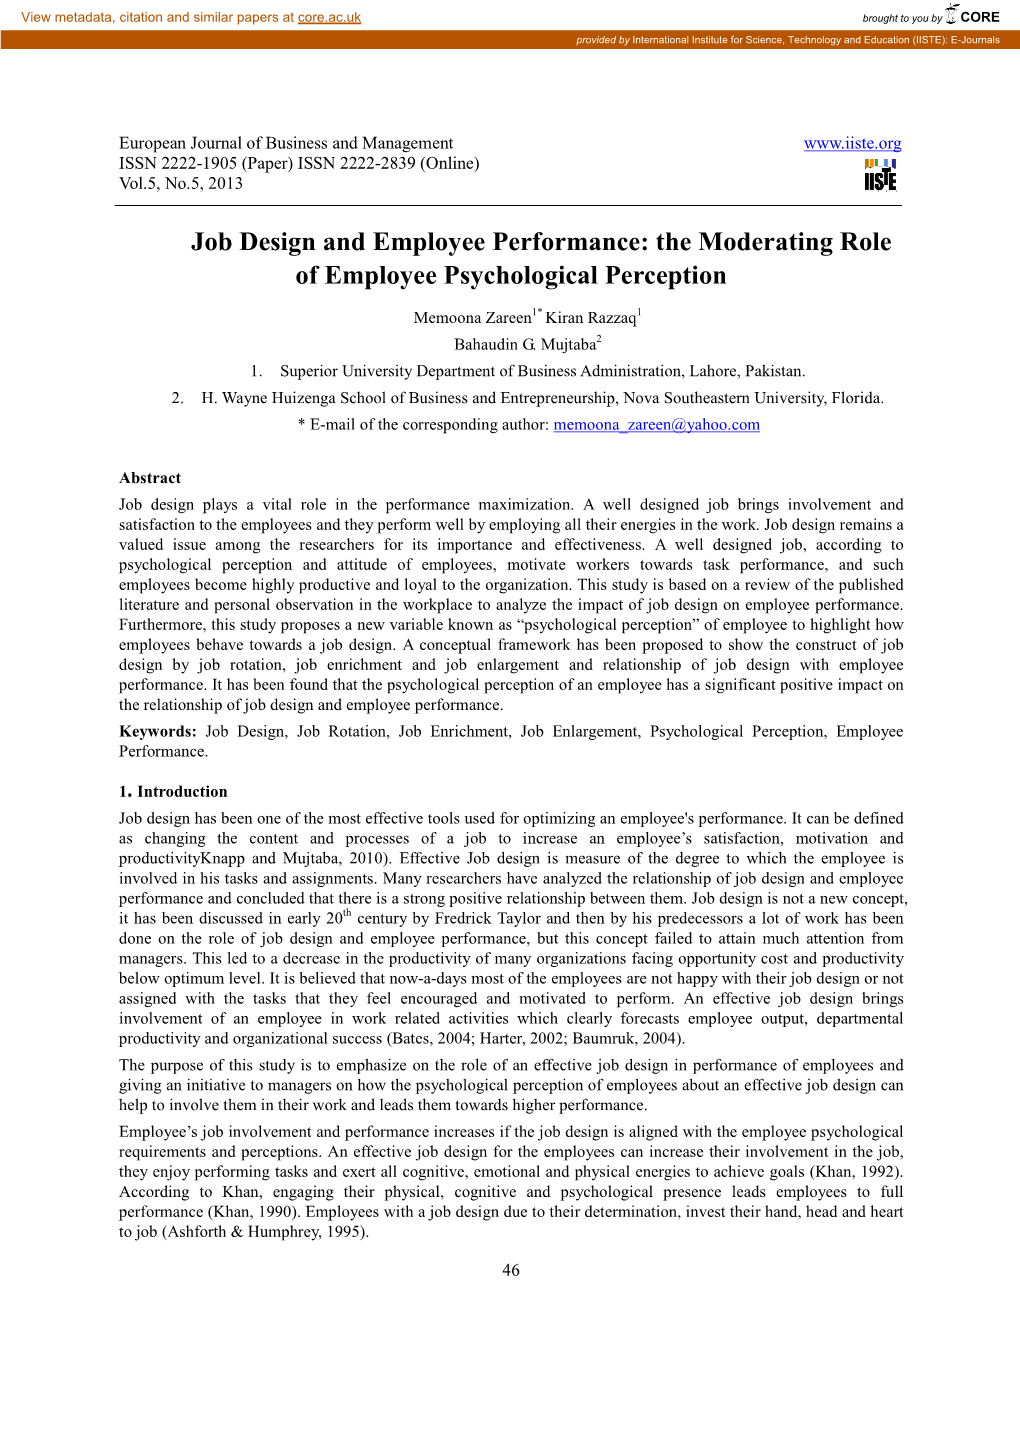 Job Design and Employee Performance: the Moderating Role of Employee Psychological Perception